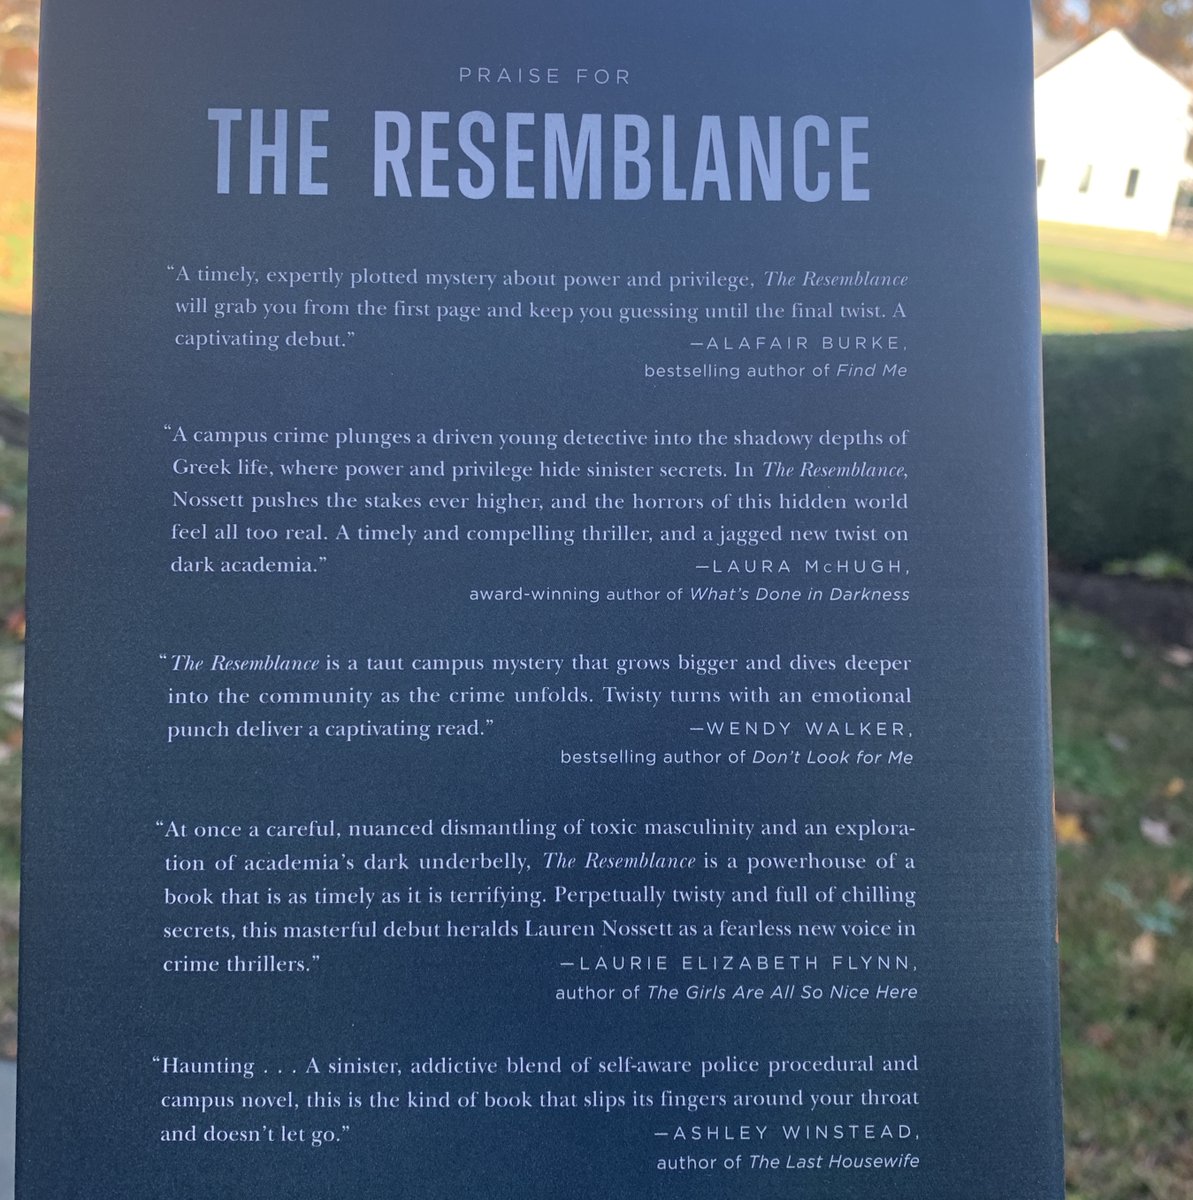 Out Today!!!! Pick it up to read in the election line - #theresemblance by #LaurenNossett LOVED this book set in academia👏